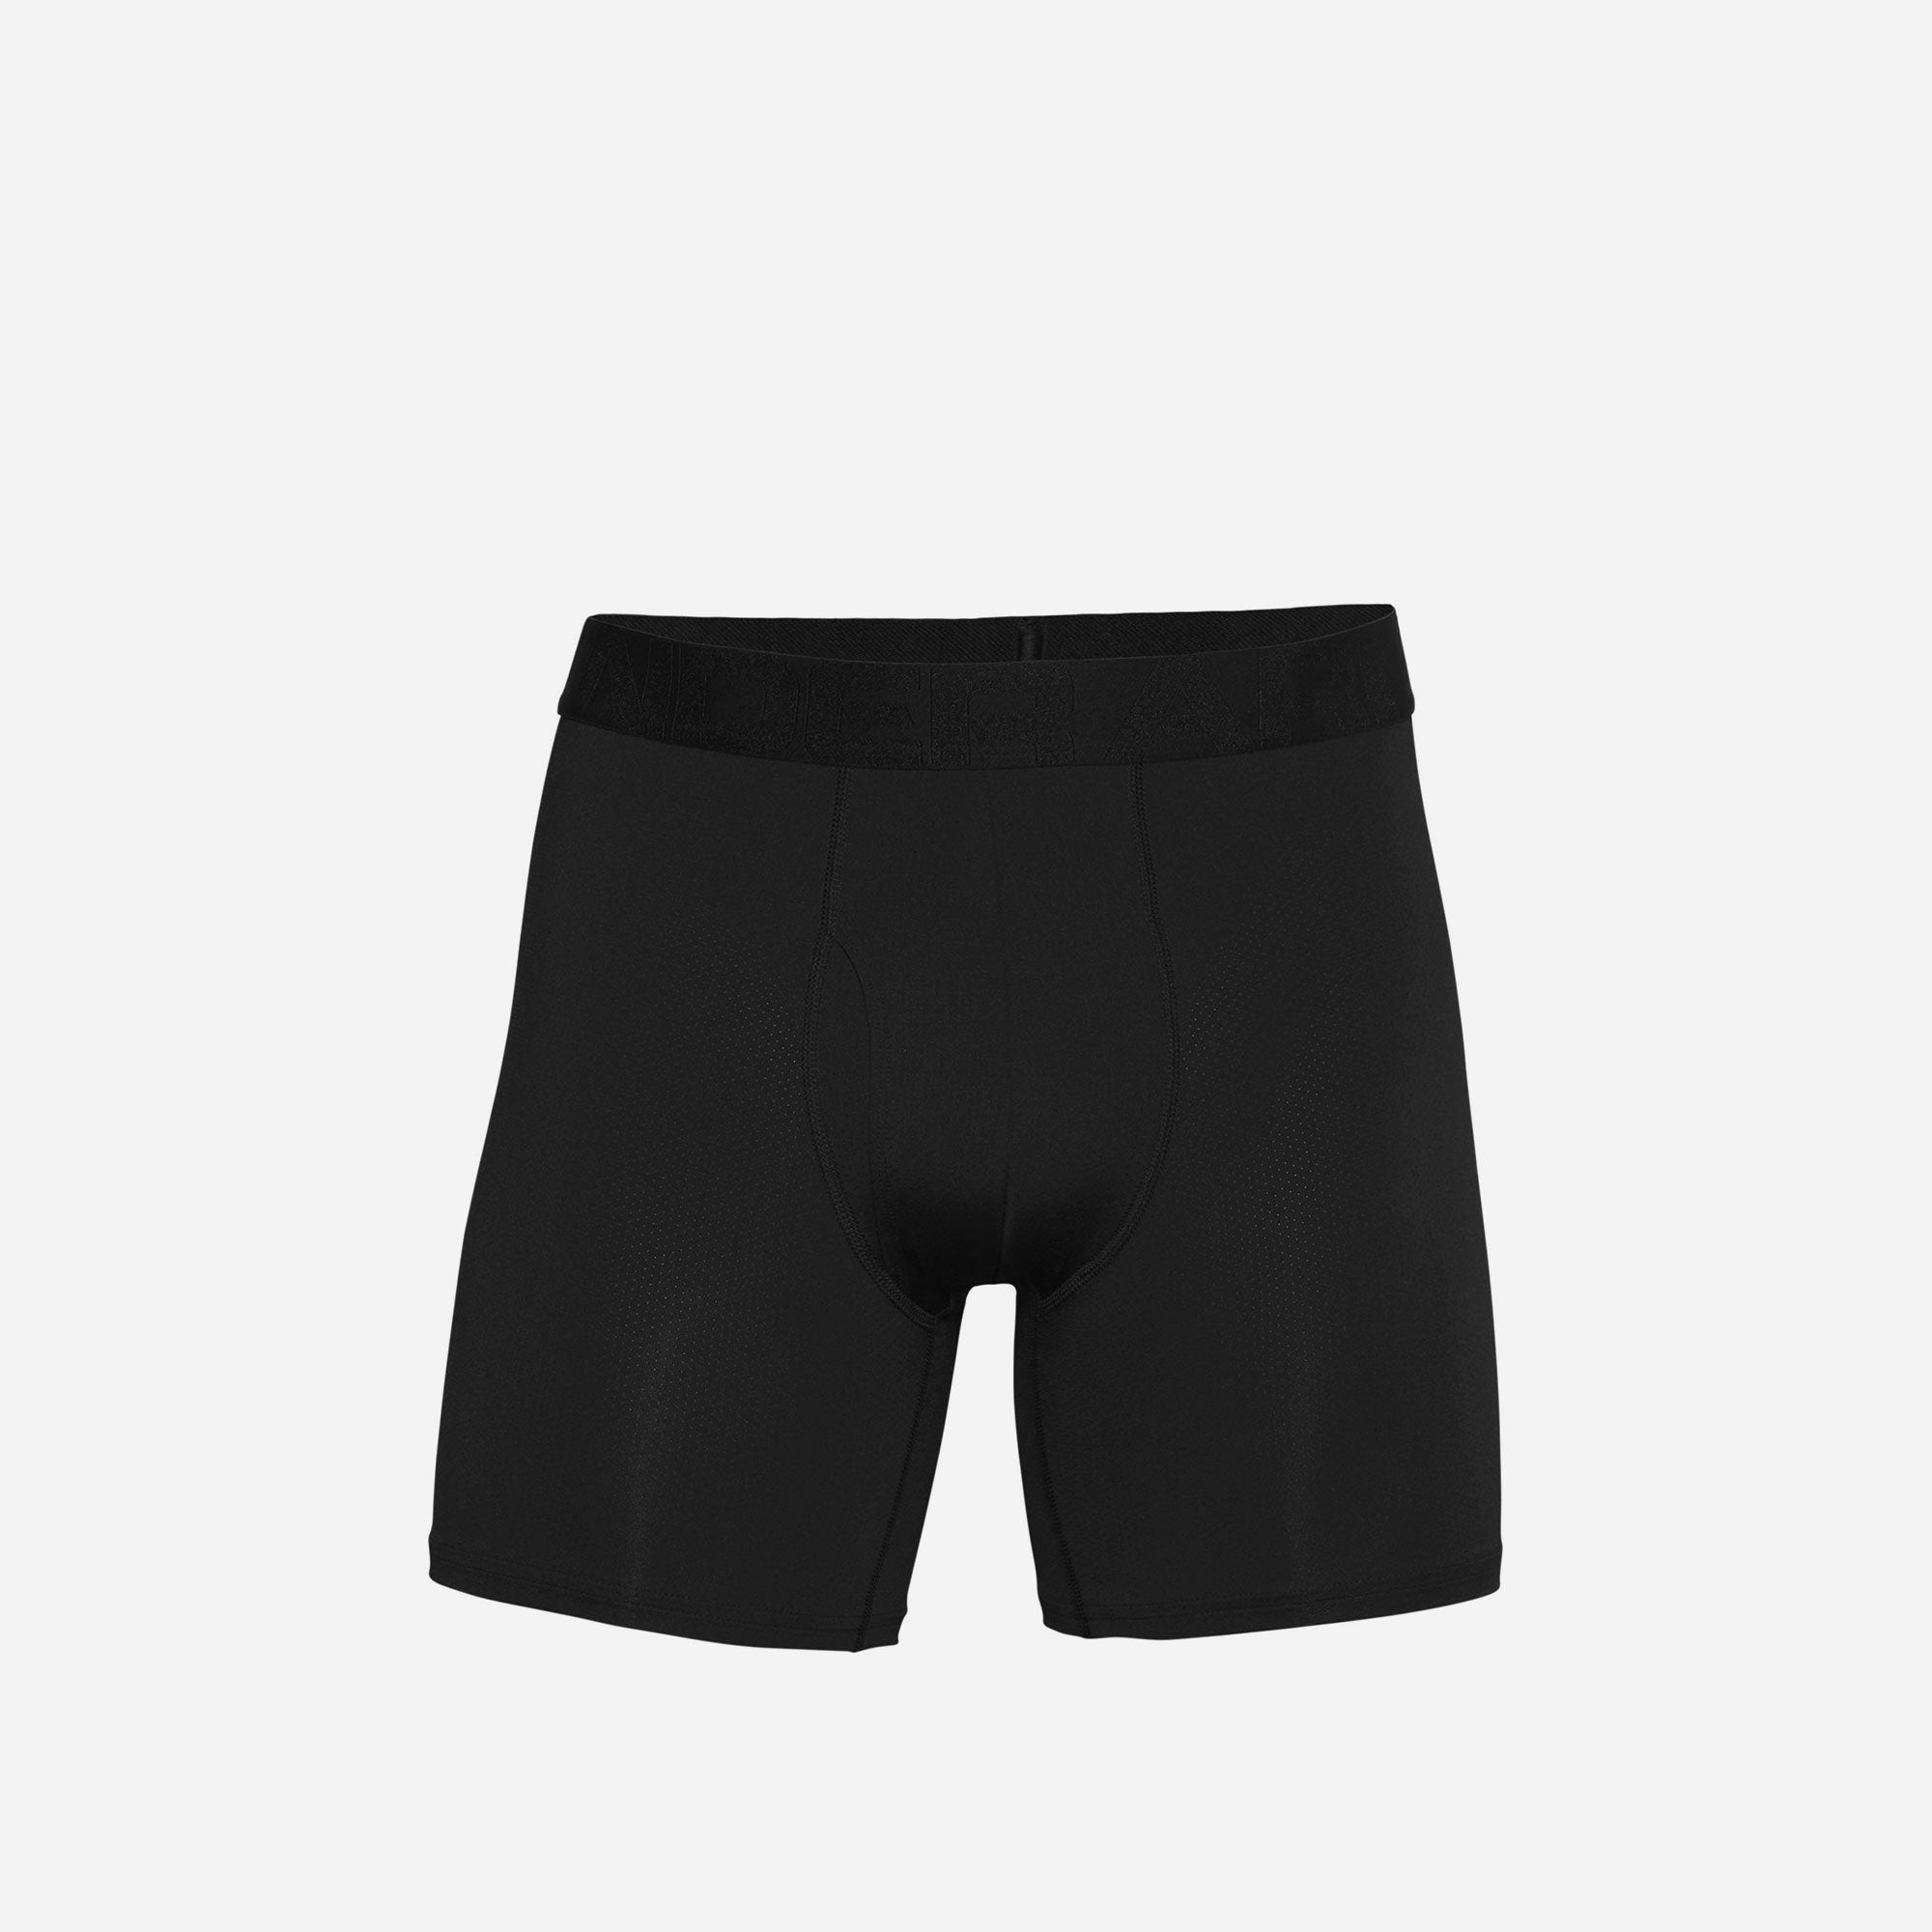 Supersports Vietnam Official  Men's Under Armour Charged Cotton